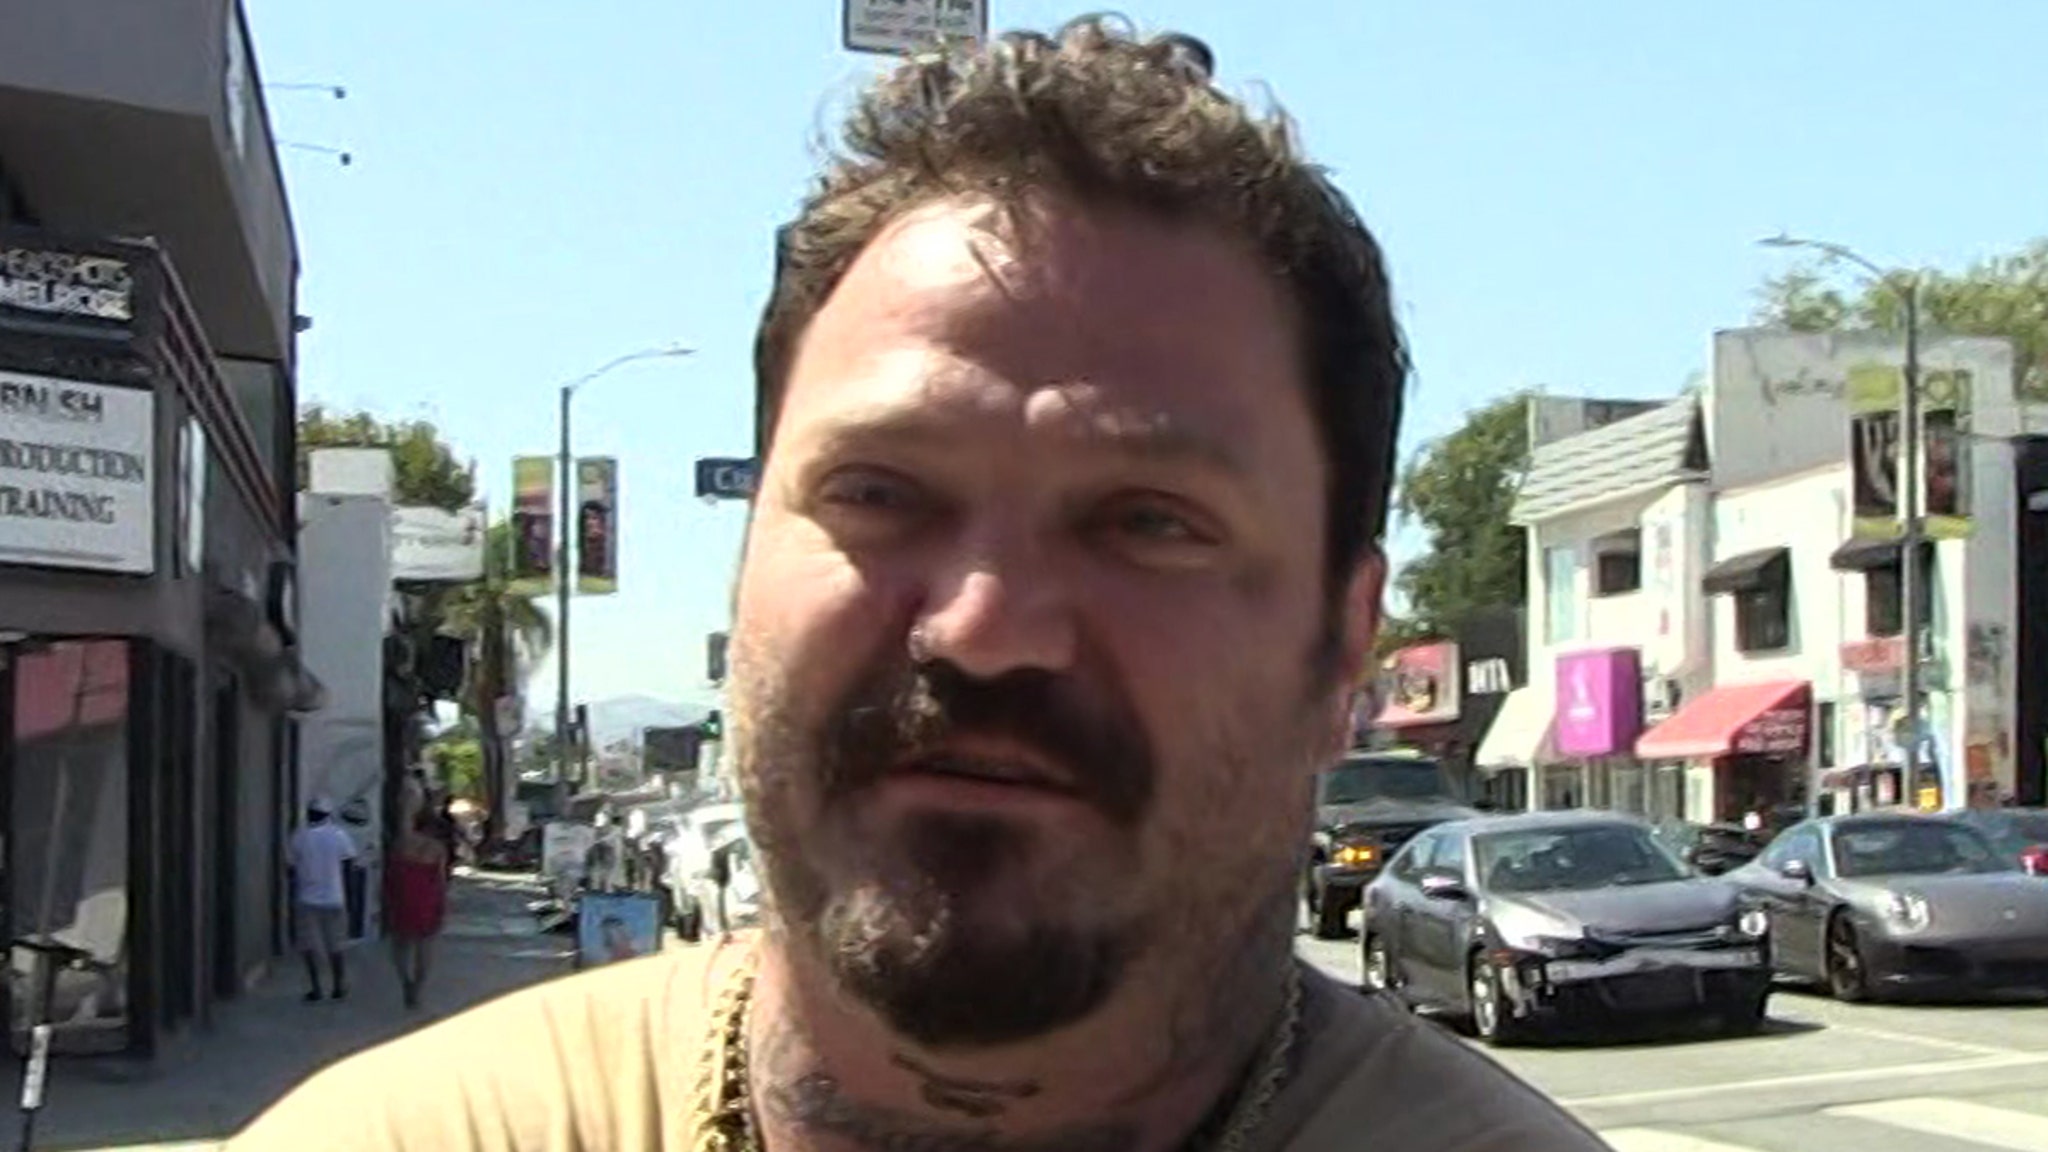 Bam Margera Reported Missing Again from Rehab Facility